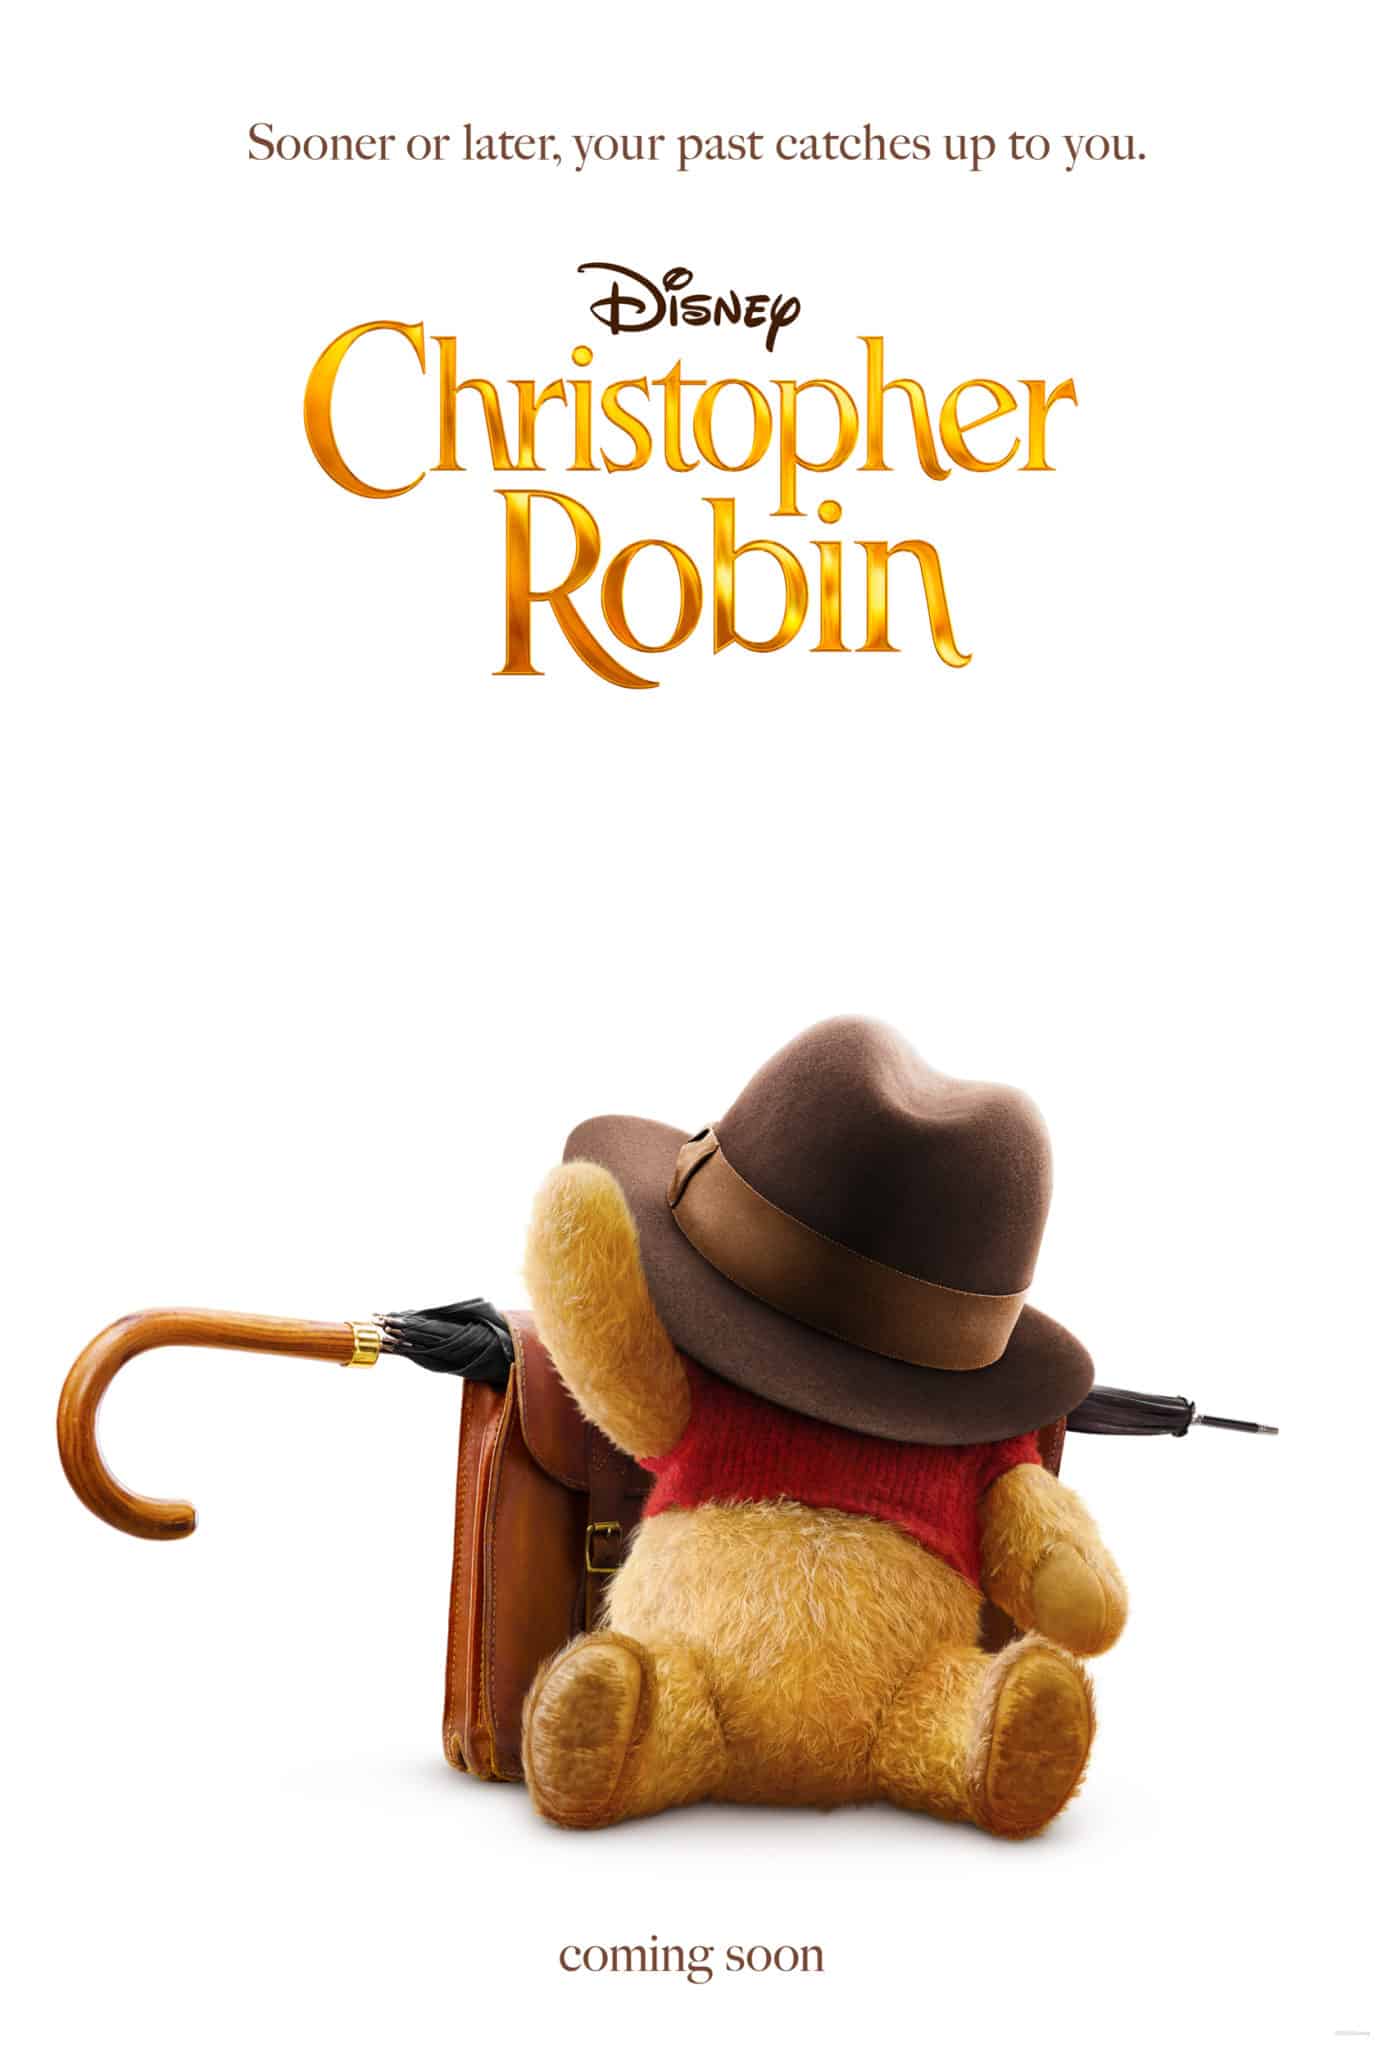 Movie poster from the new disney movie titled Christopher Robin